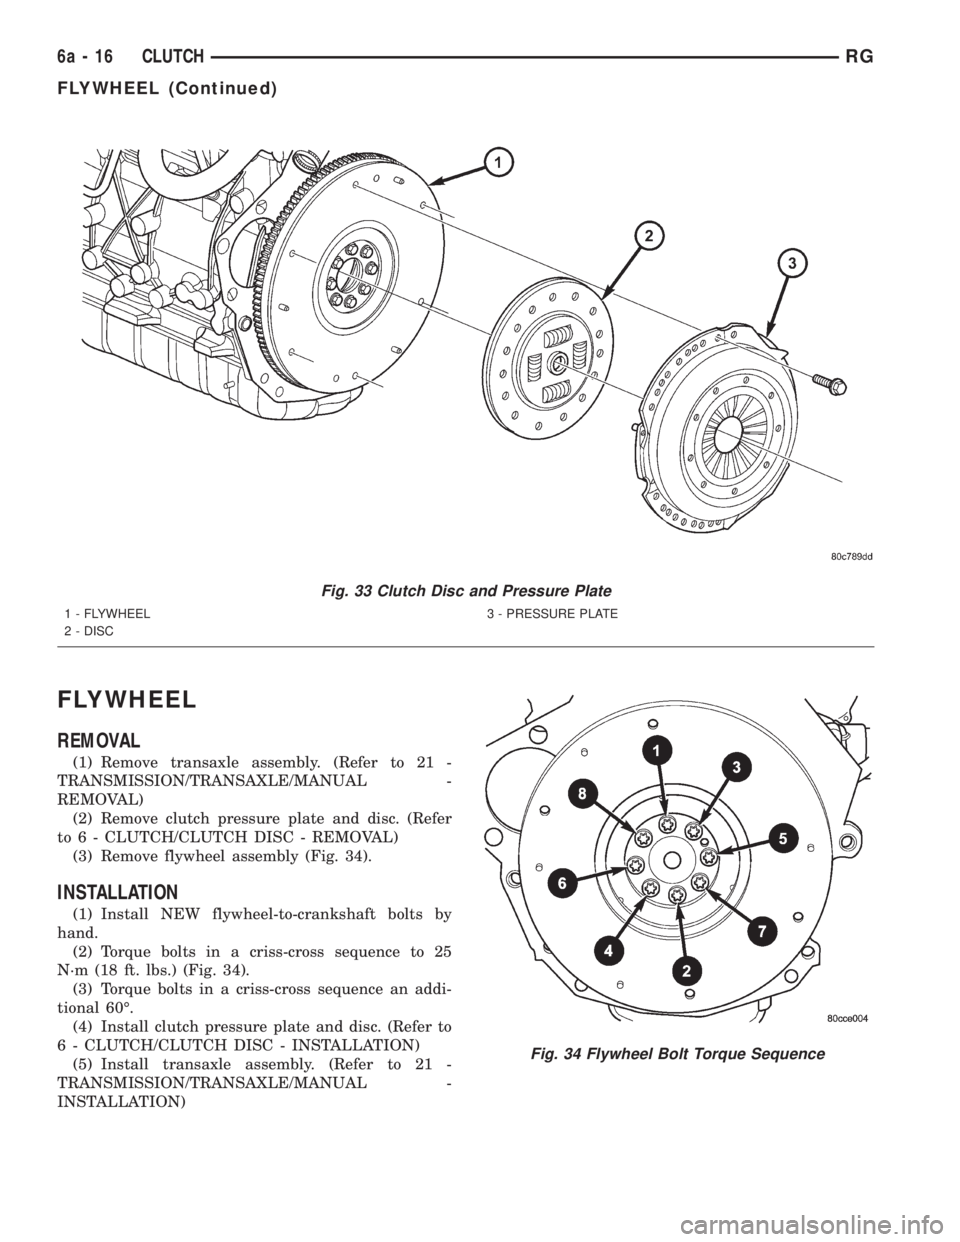 CHRYSLER VOYAGER 2001  Service Manual FLYWHEEL
REMOVAL
(1) Remove transaxle assembly. (Refer to 21 -
TRANSMISSION/TRANSAXLE/MANUAL -
REMOVAL)
(2) Remove clutch pressure plate and disc. (Refer
to 6 - CLUTCH/CLUTCH DISC - REMOVAL)
(3) Remov